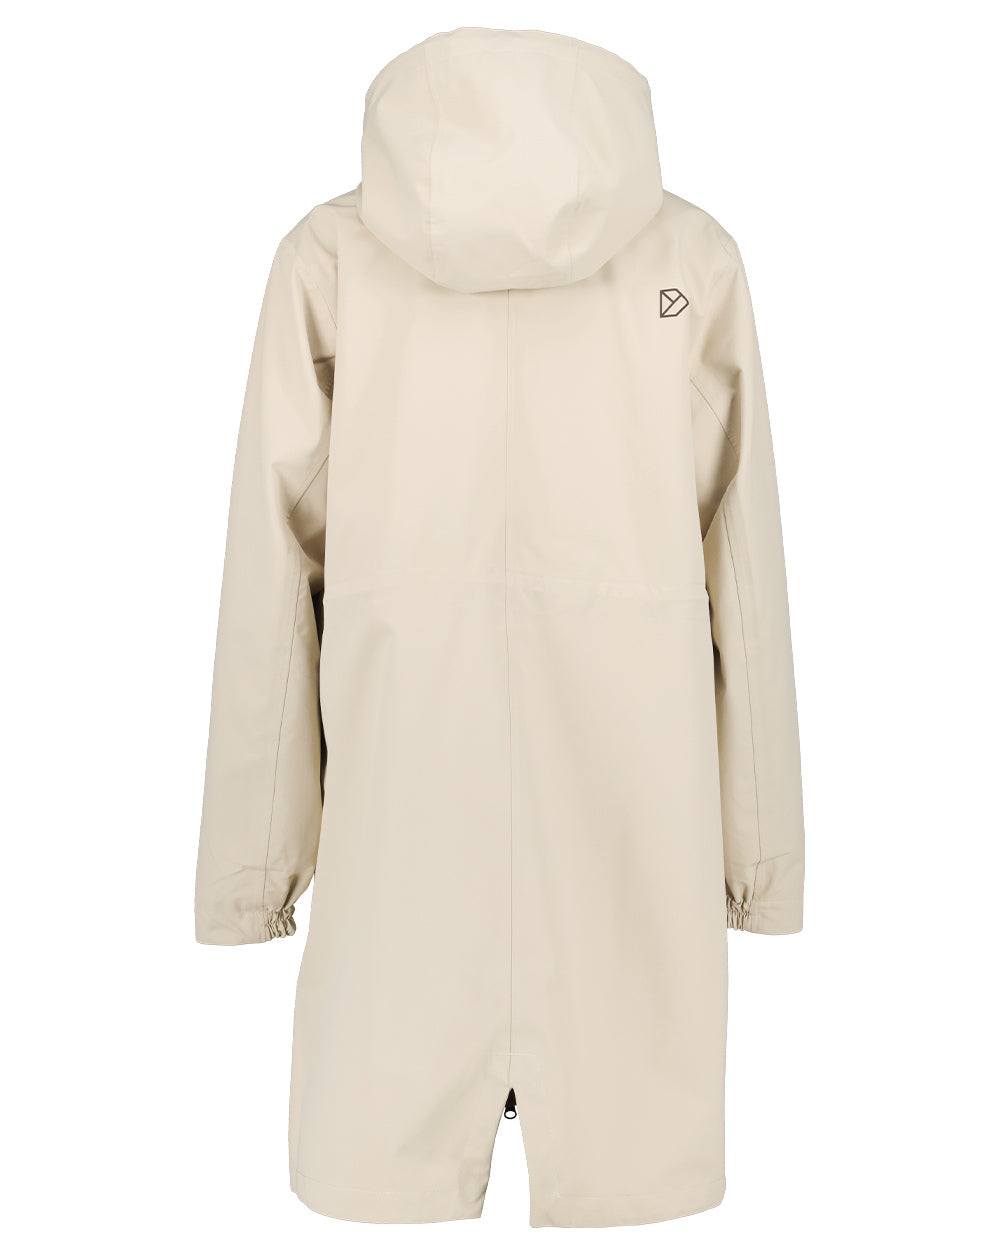 Clay Beige Coloured Didriksons Marta Womens Parka 3 On A White Background 